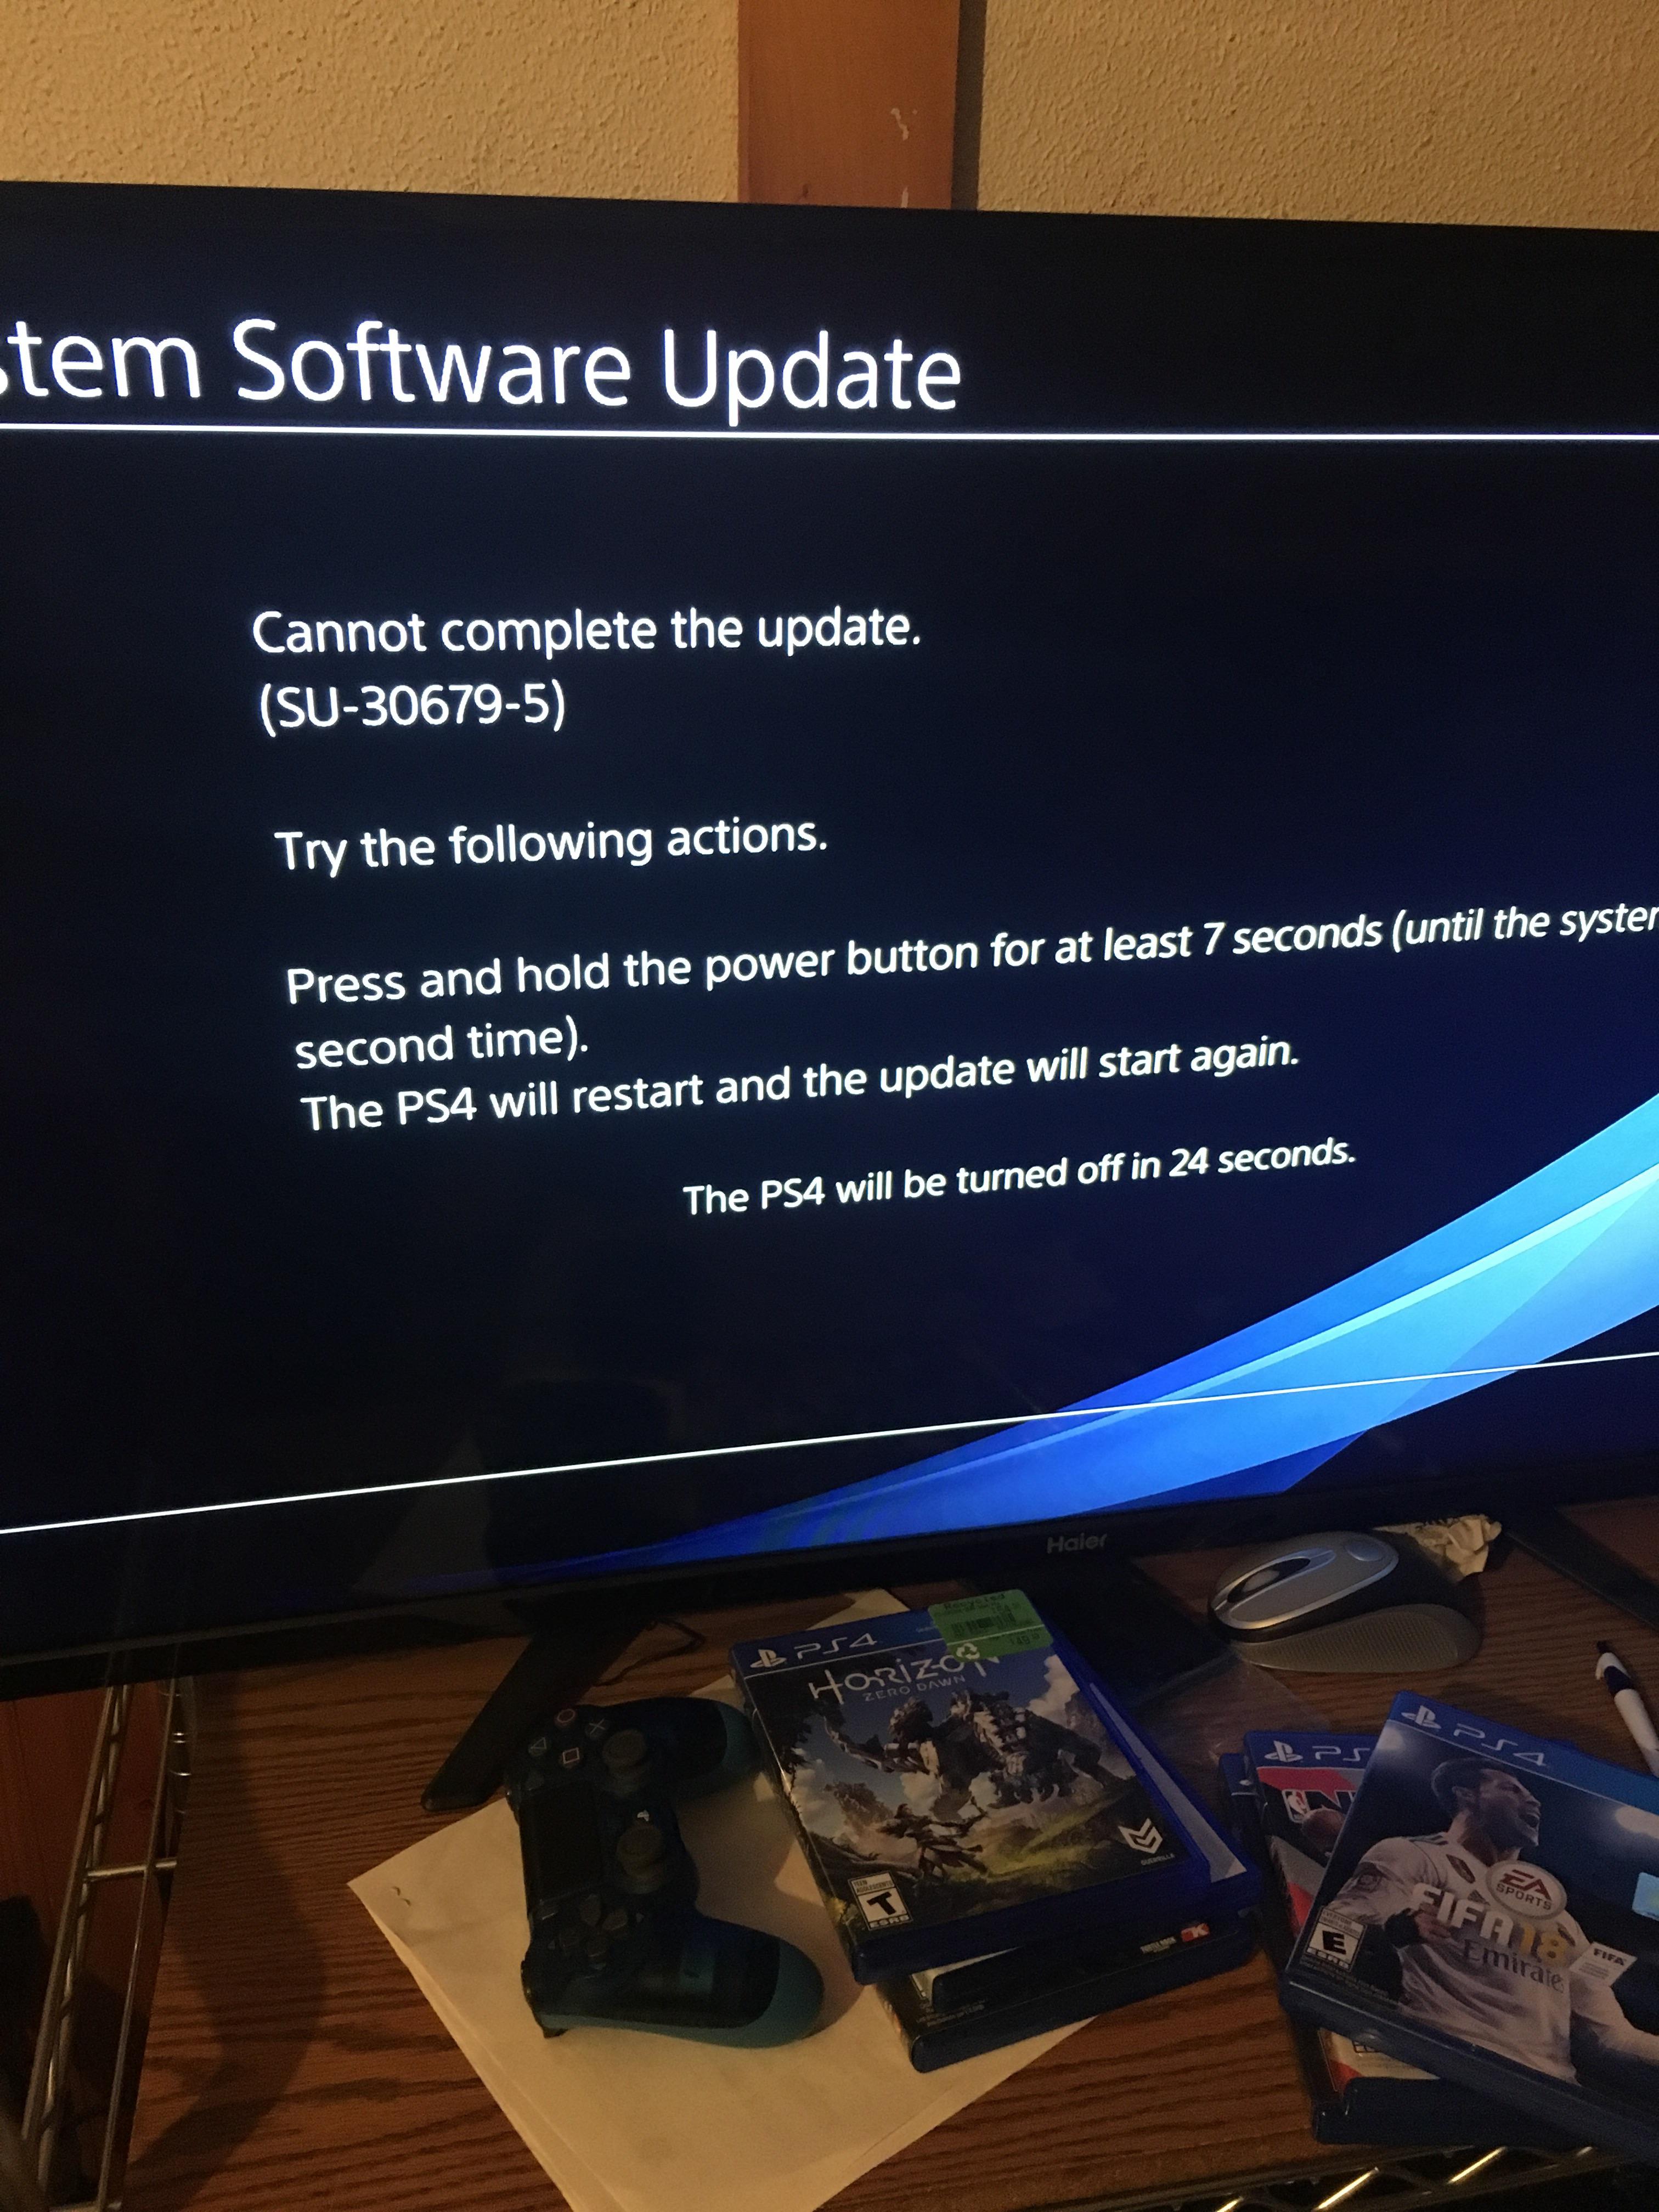 Wait for the system to download and install any available updates.
Restart the PS4 after the update is complete.